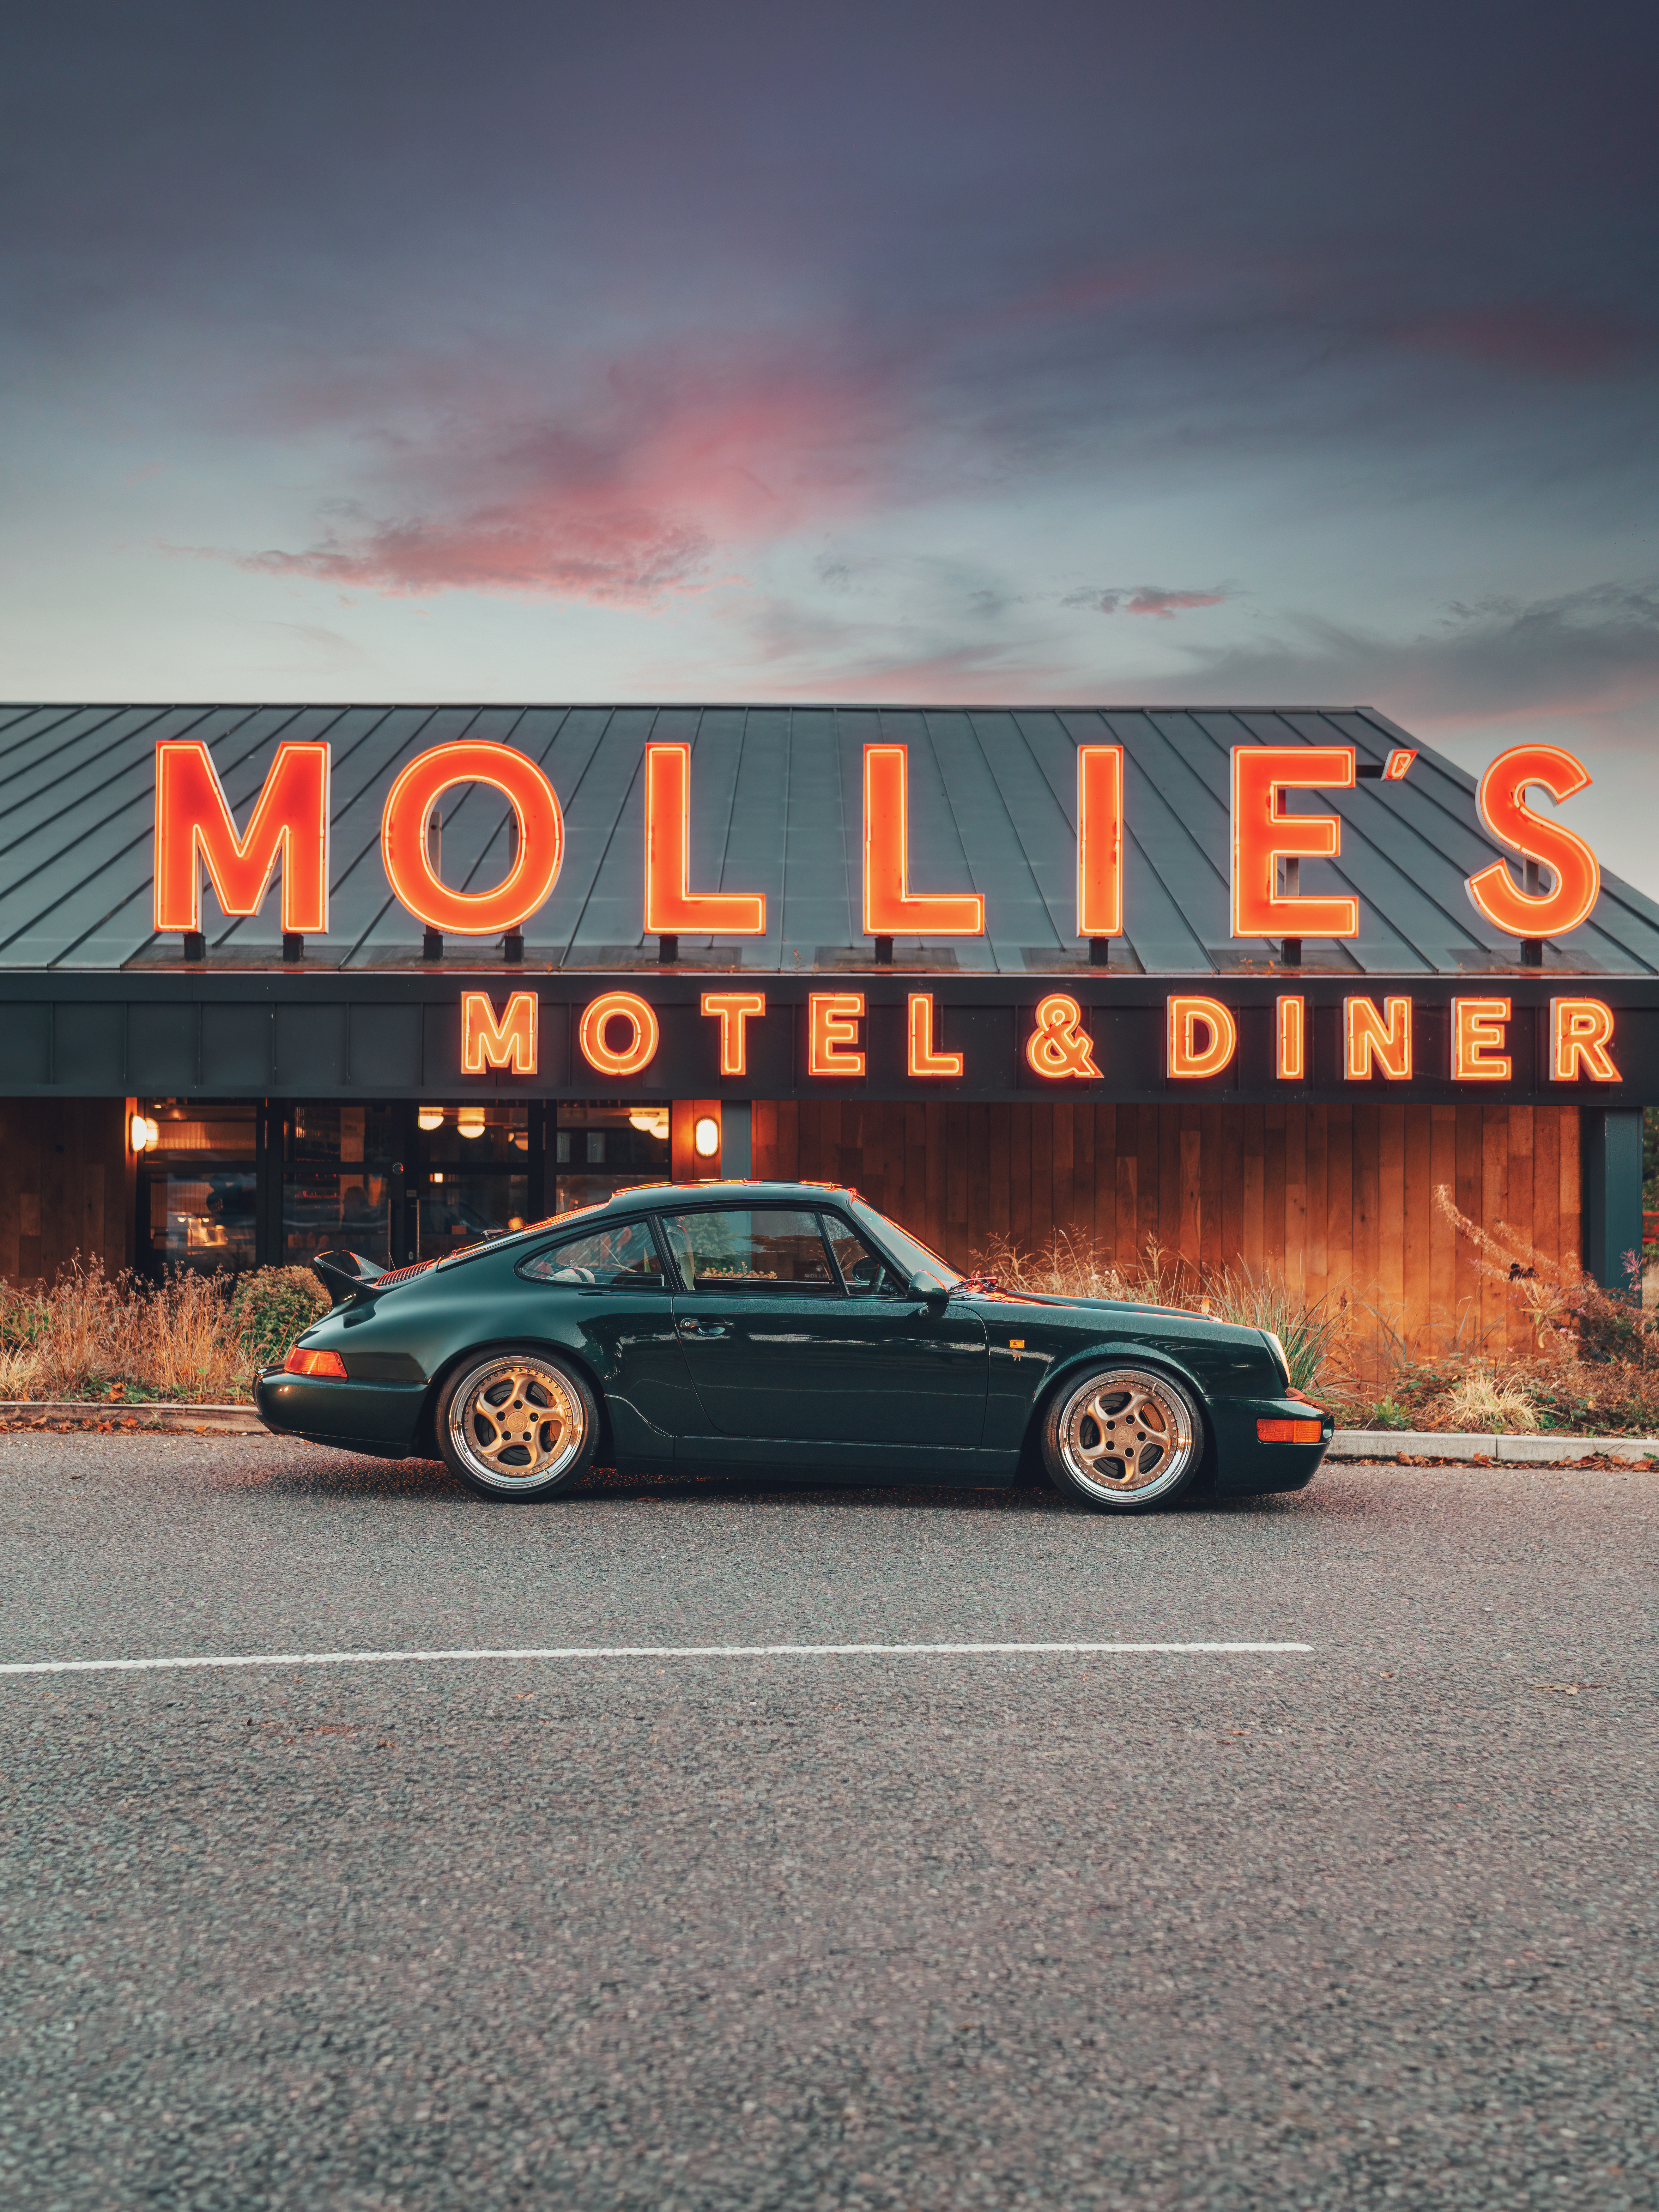 Porsche 911 (964) parked outside a diner with neon sign